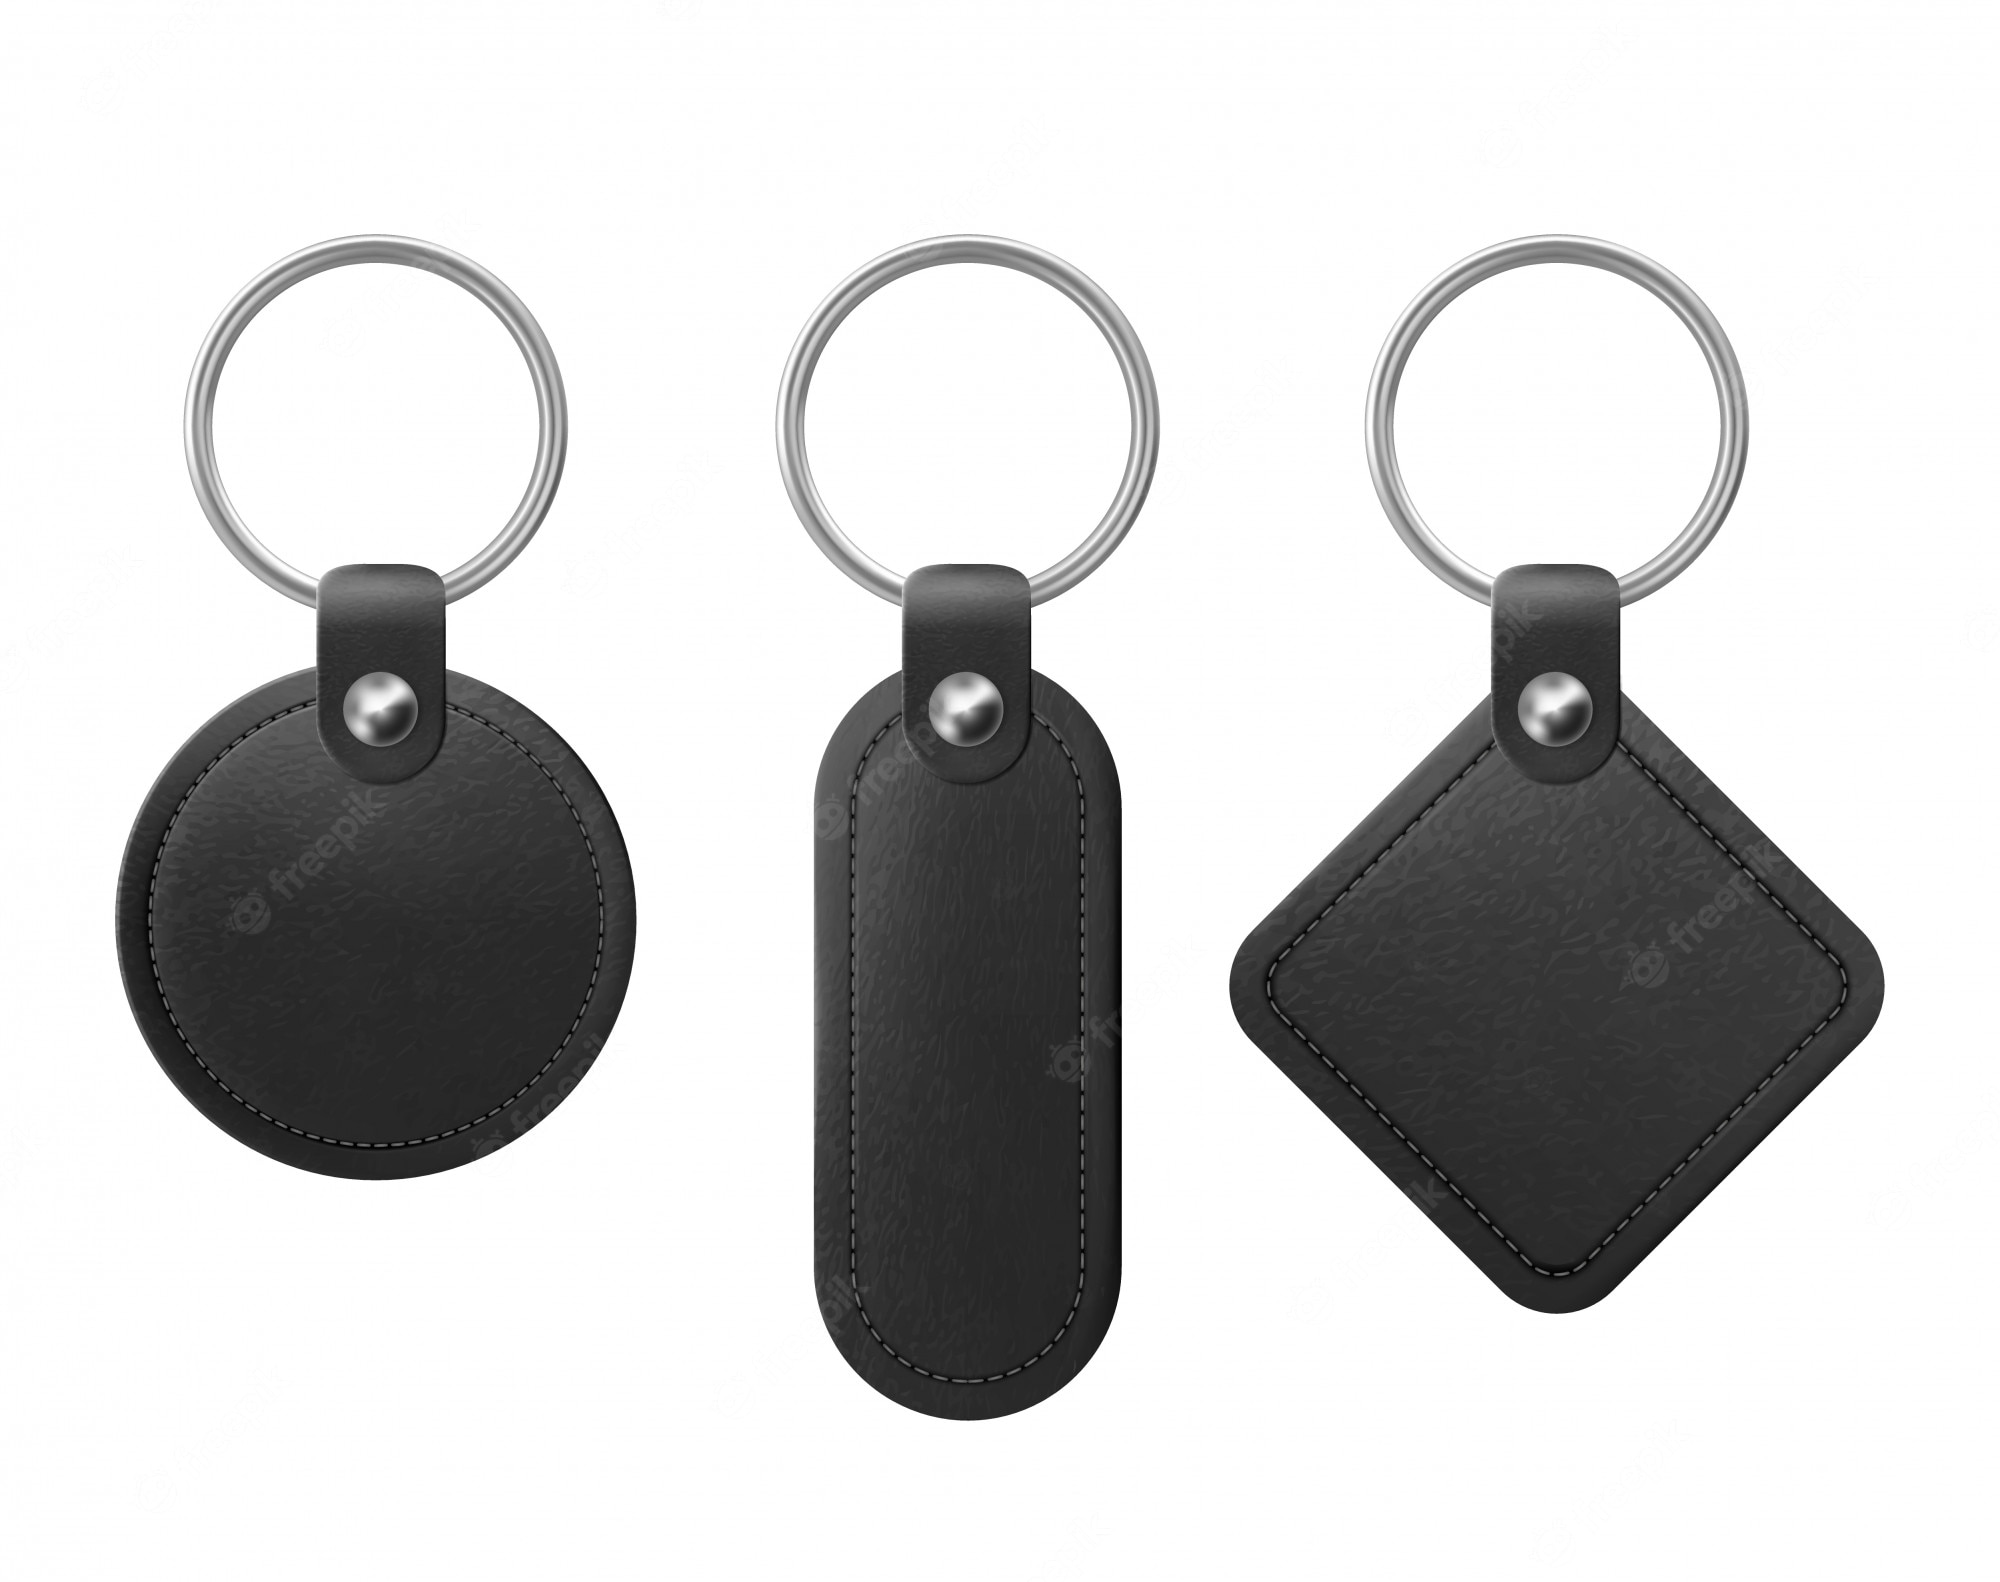 10 Cool Keychains For Men Who Want to Stand Out